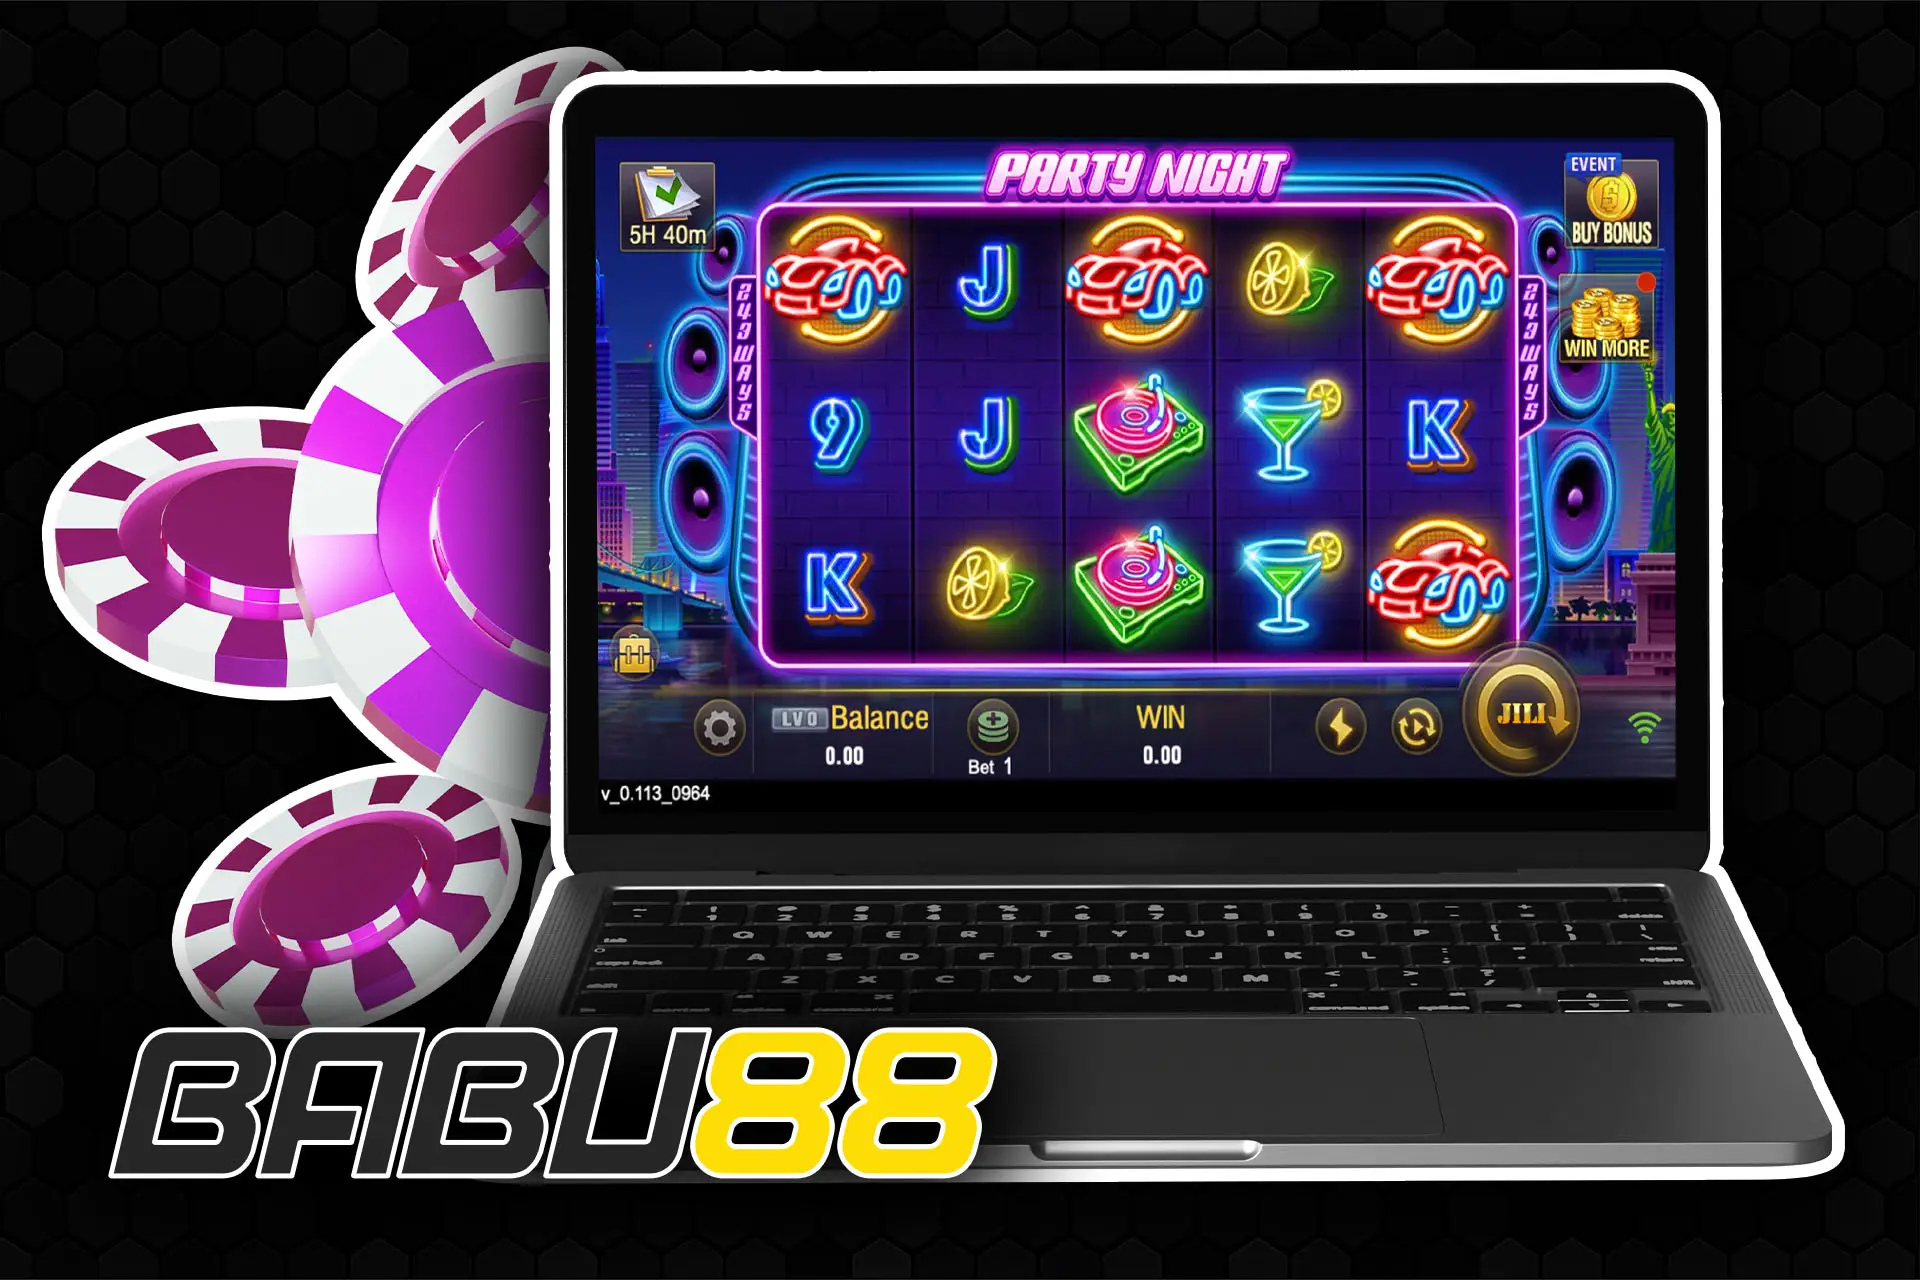 You can play the Party Night slot in the Babu88 casino.